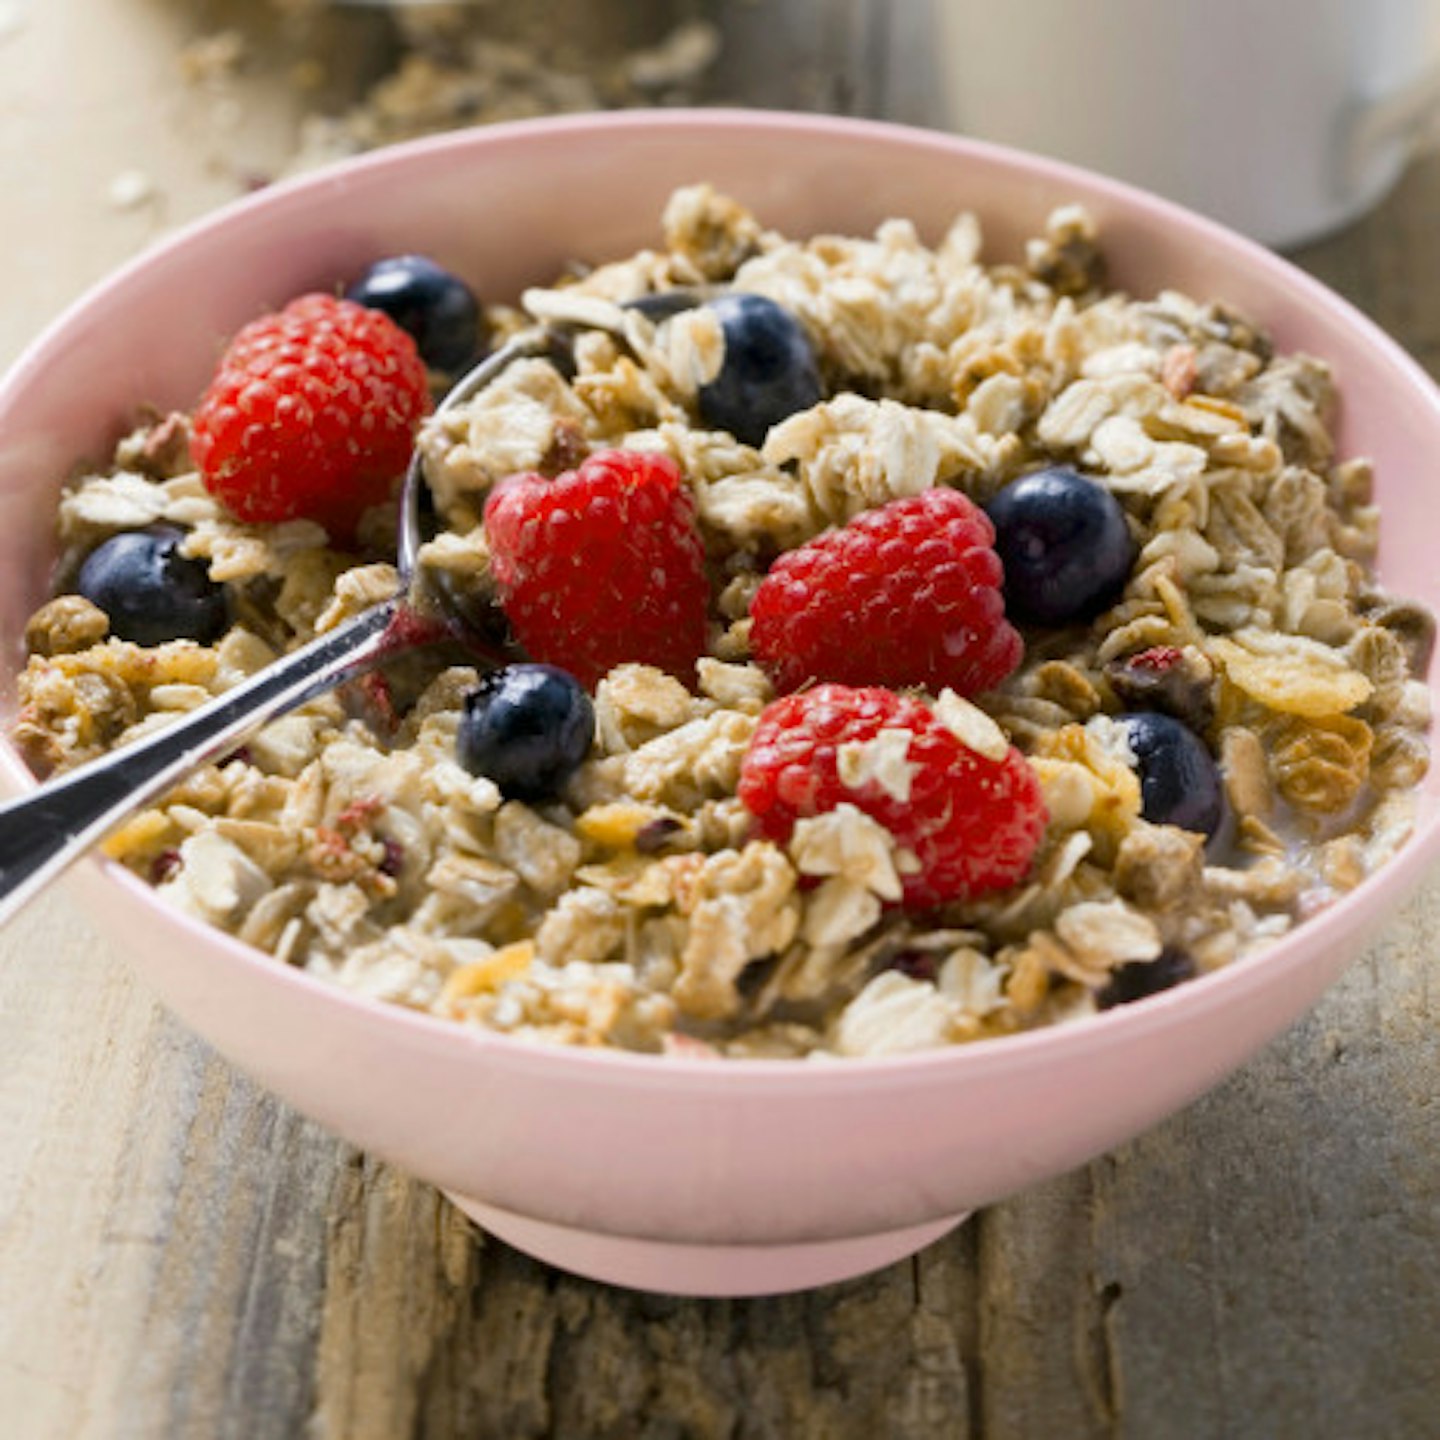 Little changes or additions to your breakfast is the perfect kick-start to a healthy day ahead.&nbsp;